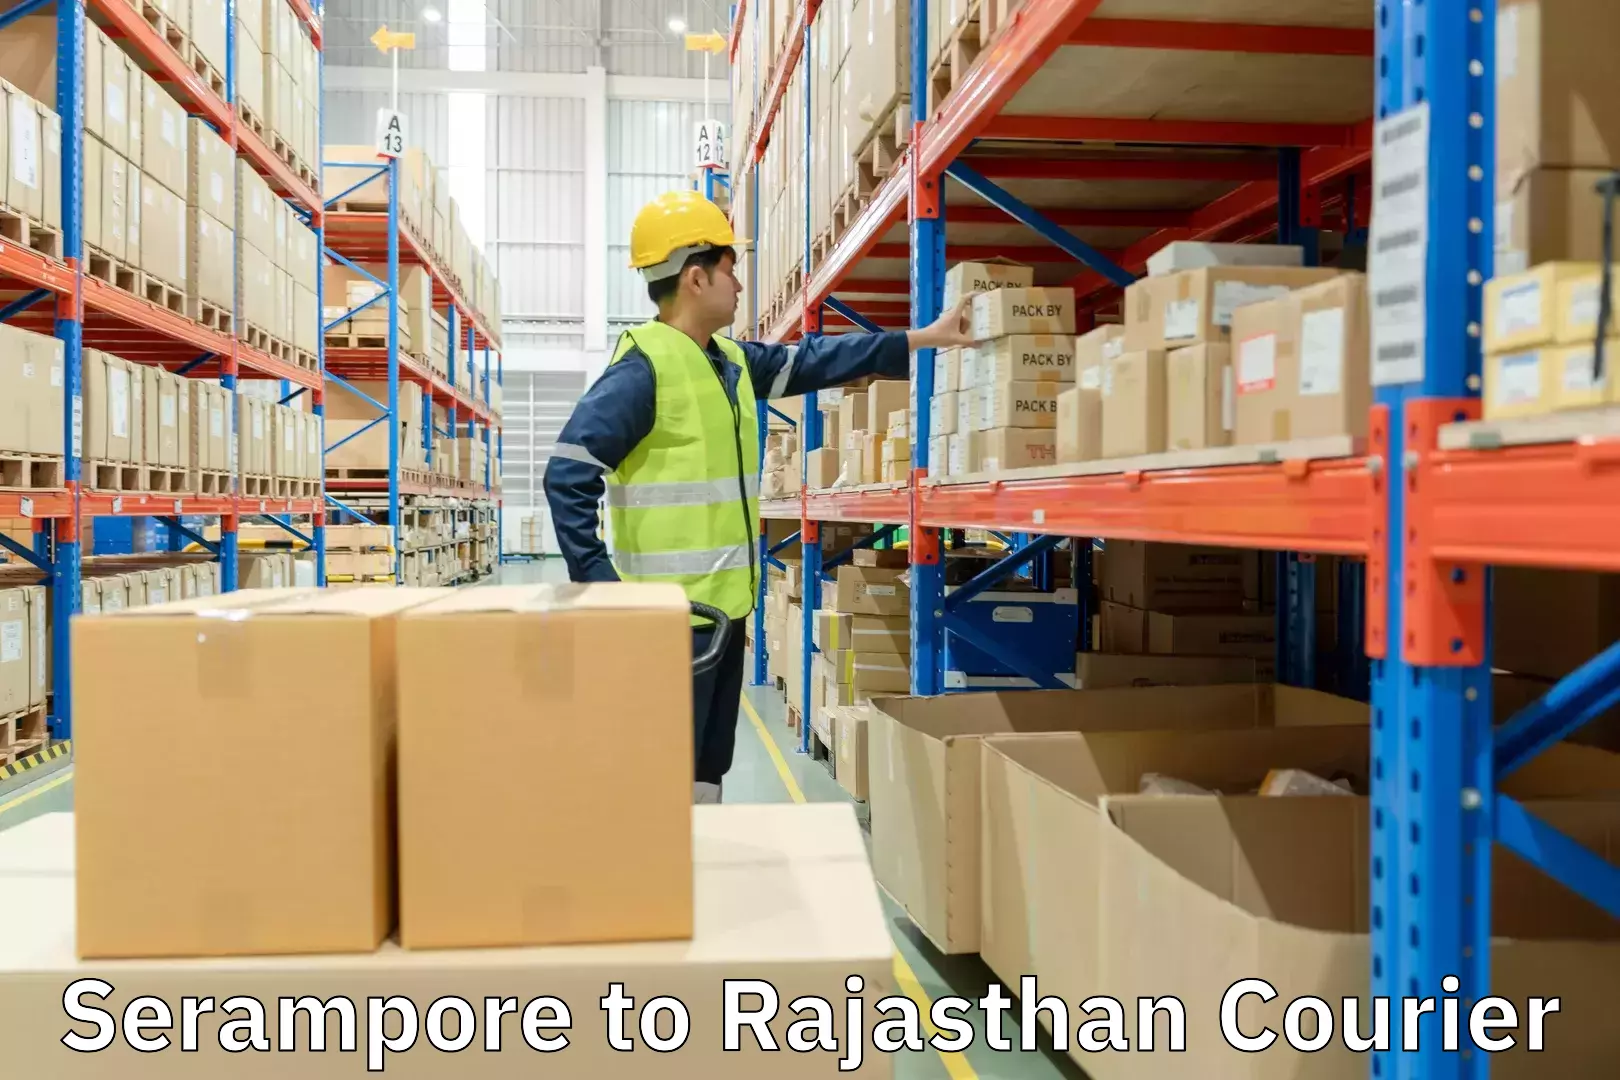 Next-day freight services Serampore to Rajasthan